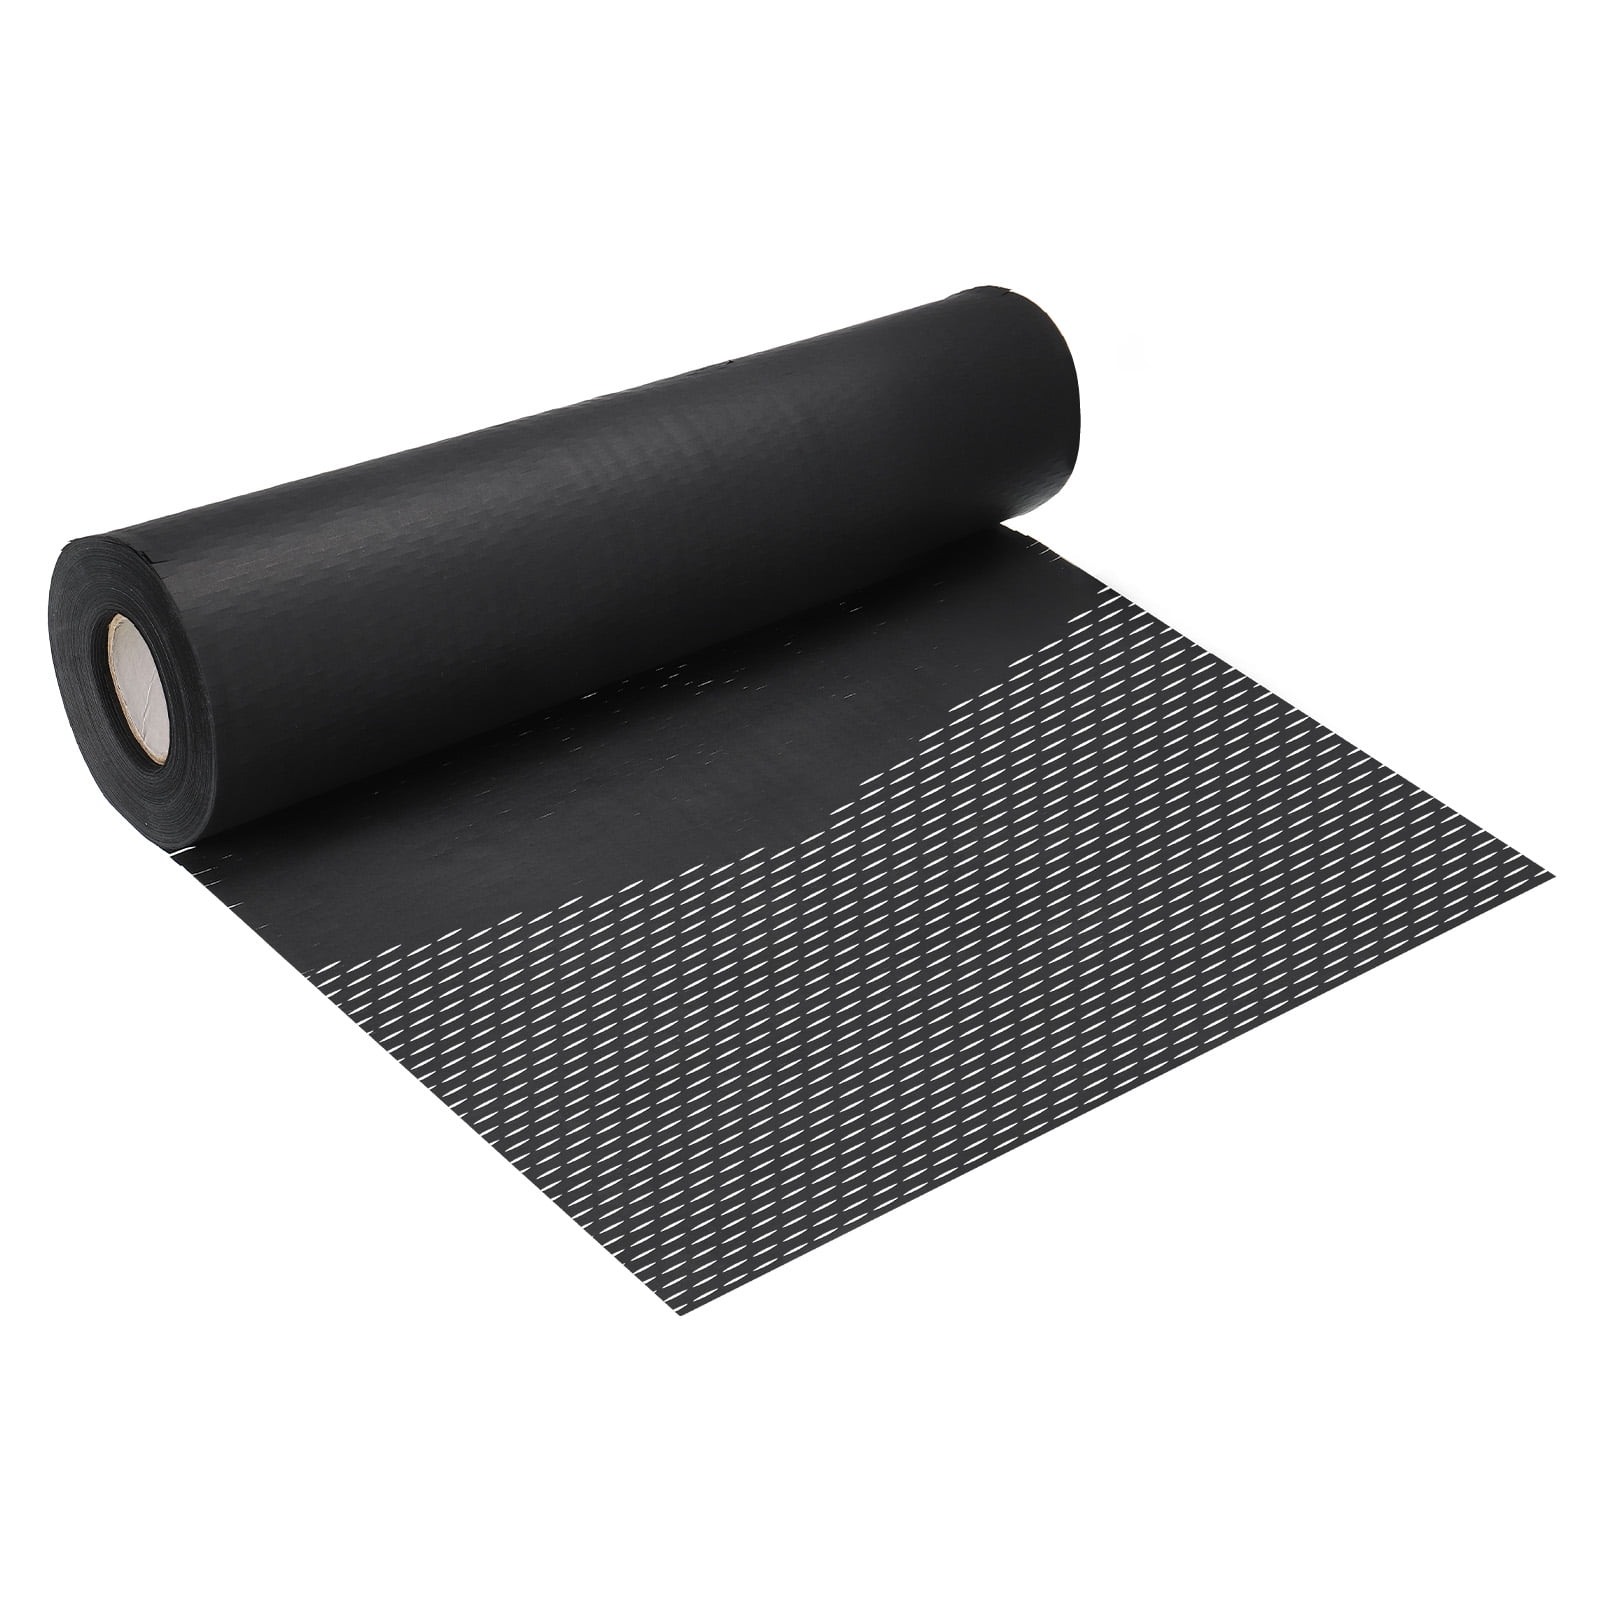 Dropship Honeycomb Packing Paper 15 Inch X 164 Foot. Black Honeycomb Wrapping  Paper 80 GSM. Protective Biodegradable Cushion Wrap Roll 15 X 164'  Perforated Honeycomb Packing Paper For Moving & Packing to